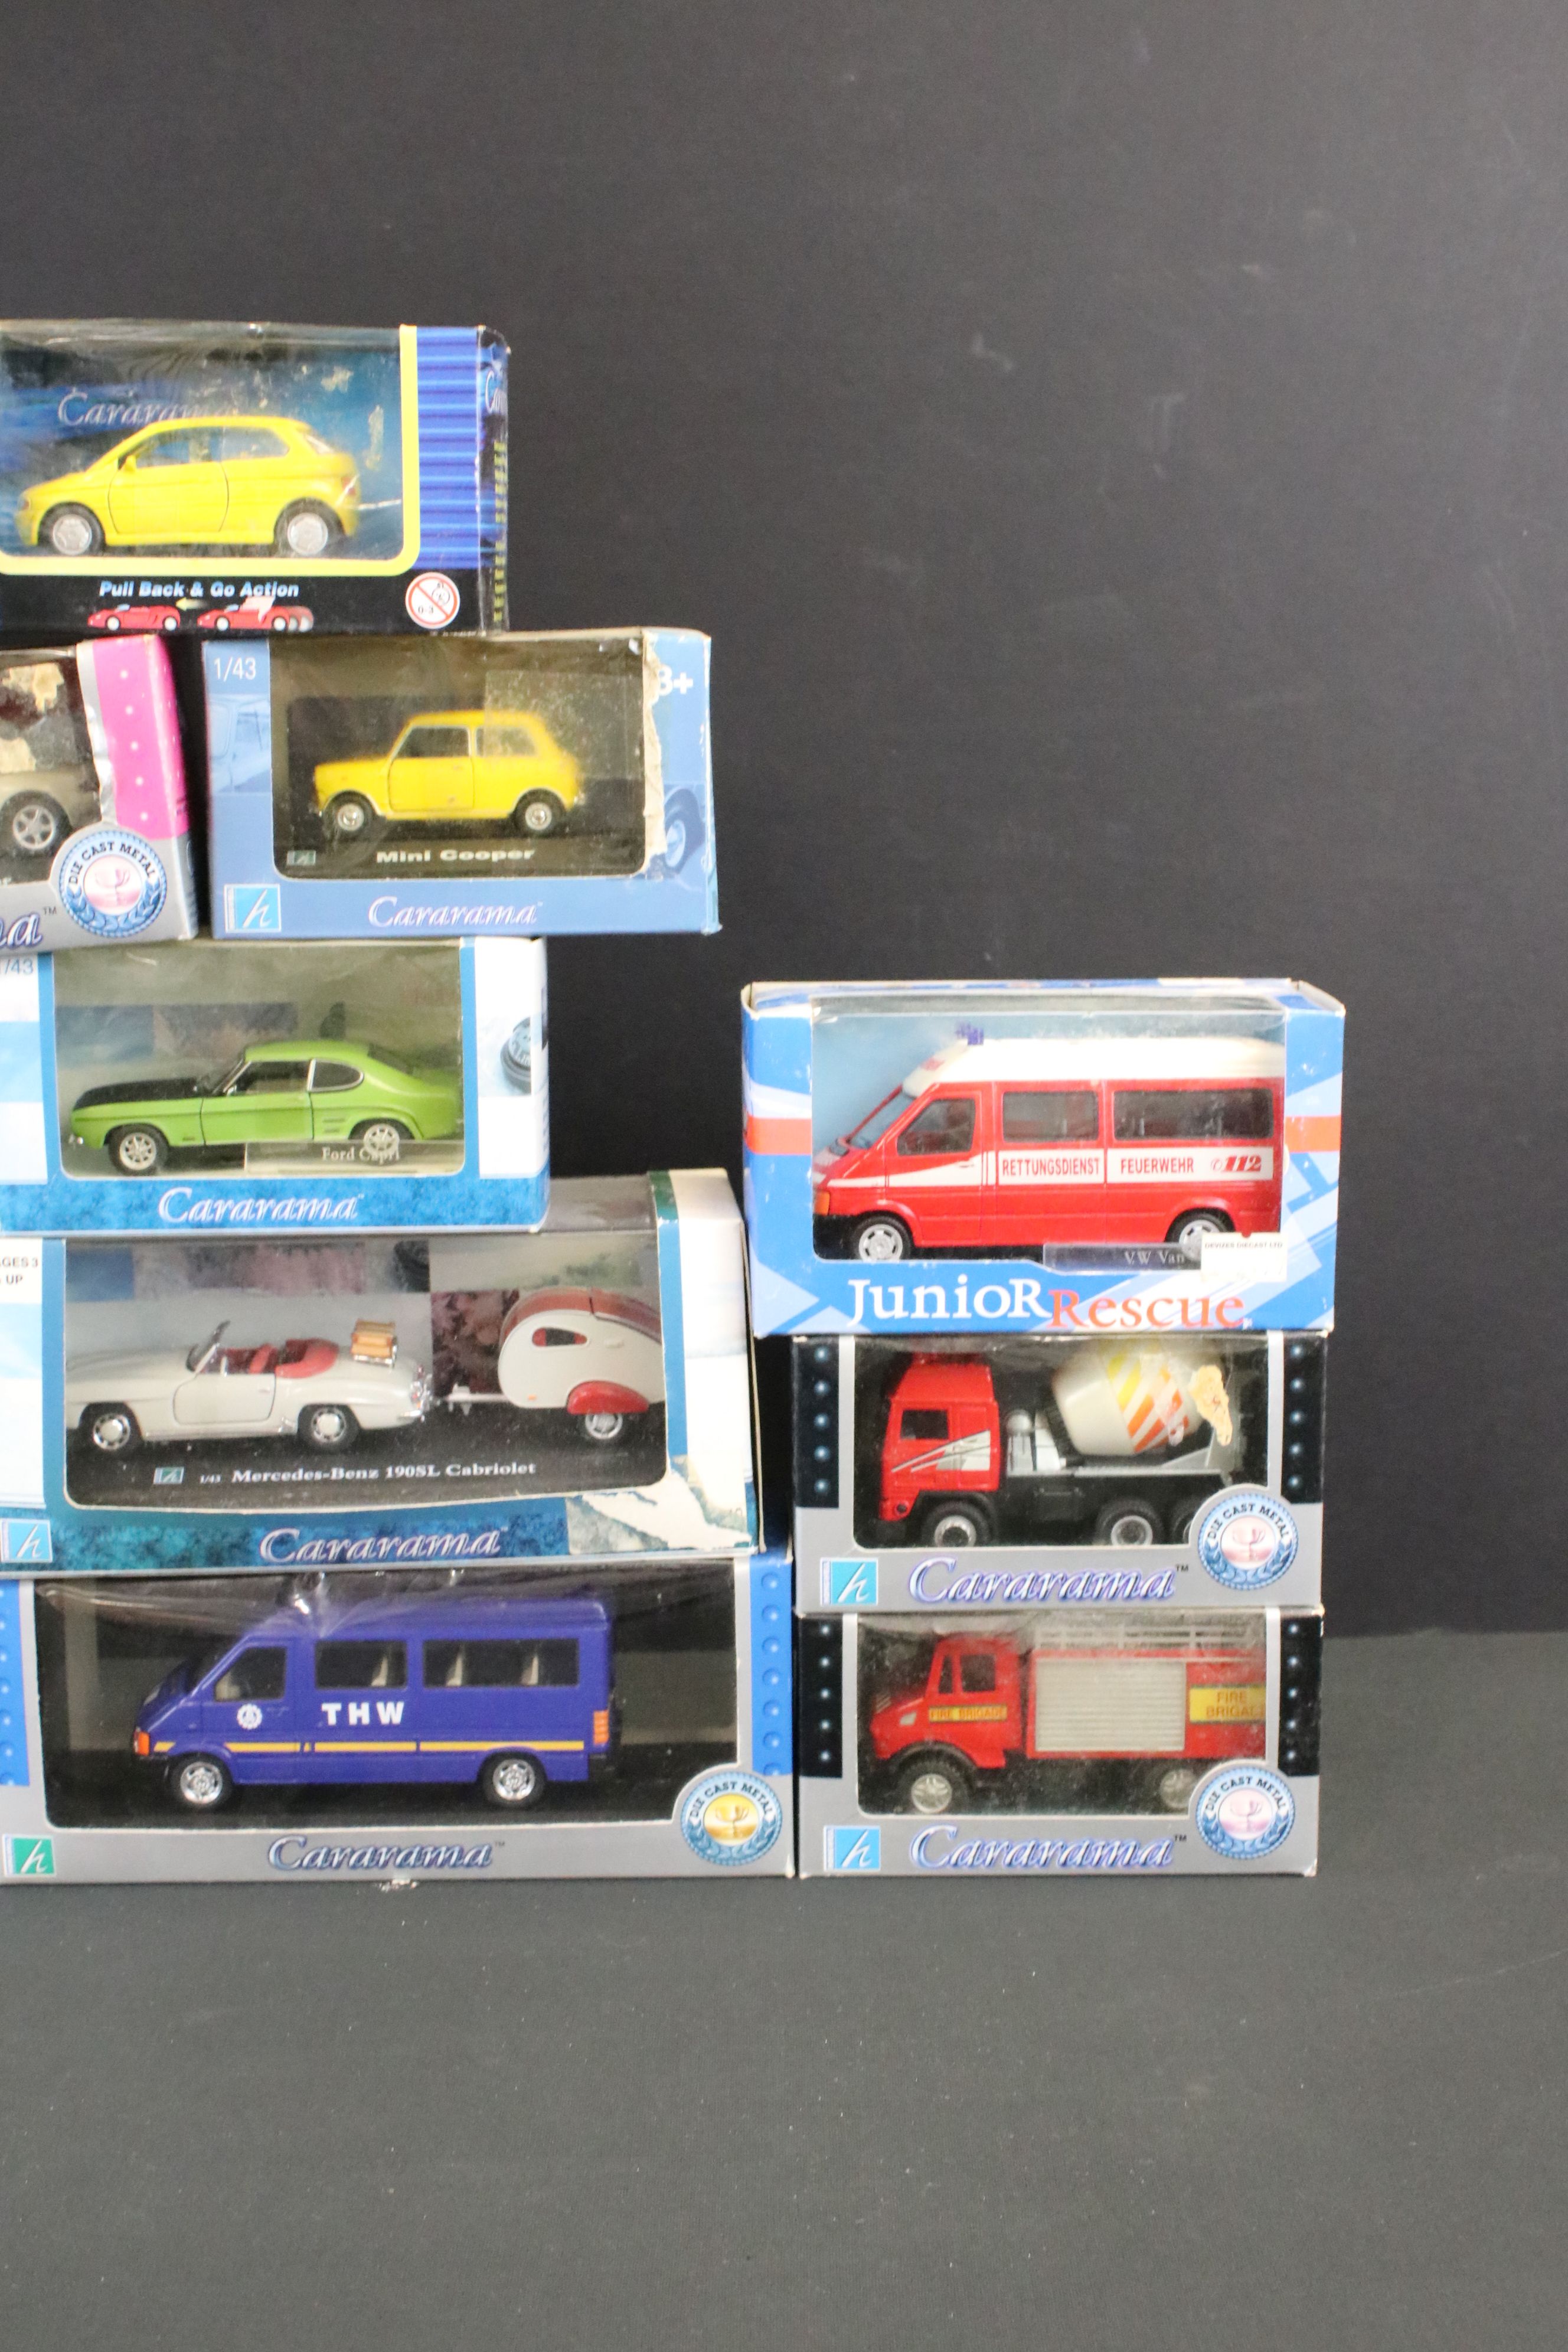 37 Boxed Cararama diecast models to include No. 252 1/43 Volkswagen Microbus multi-model set, No. - Image 8 of 8